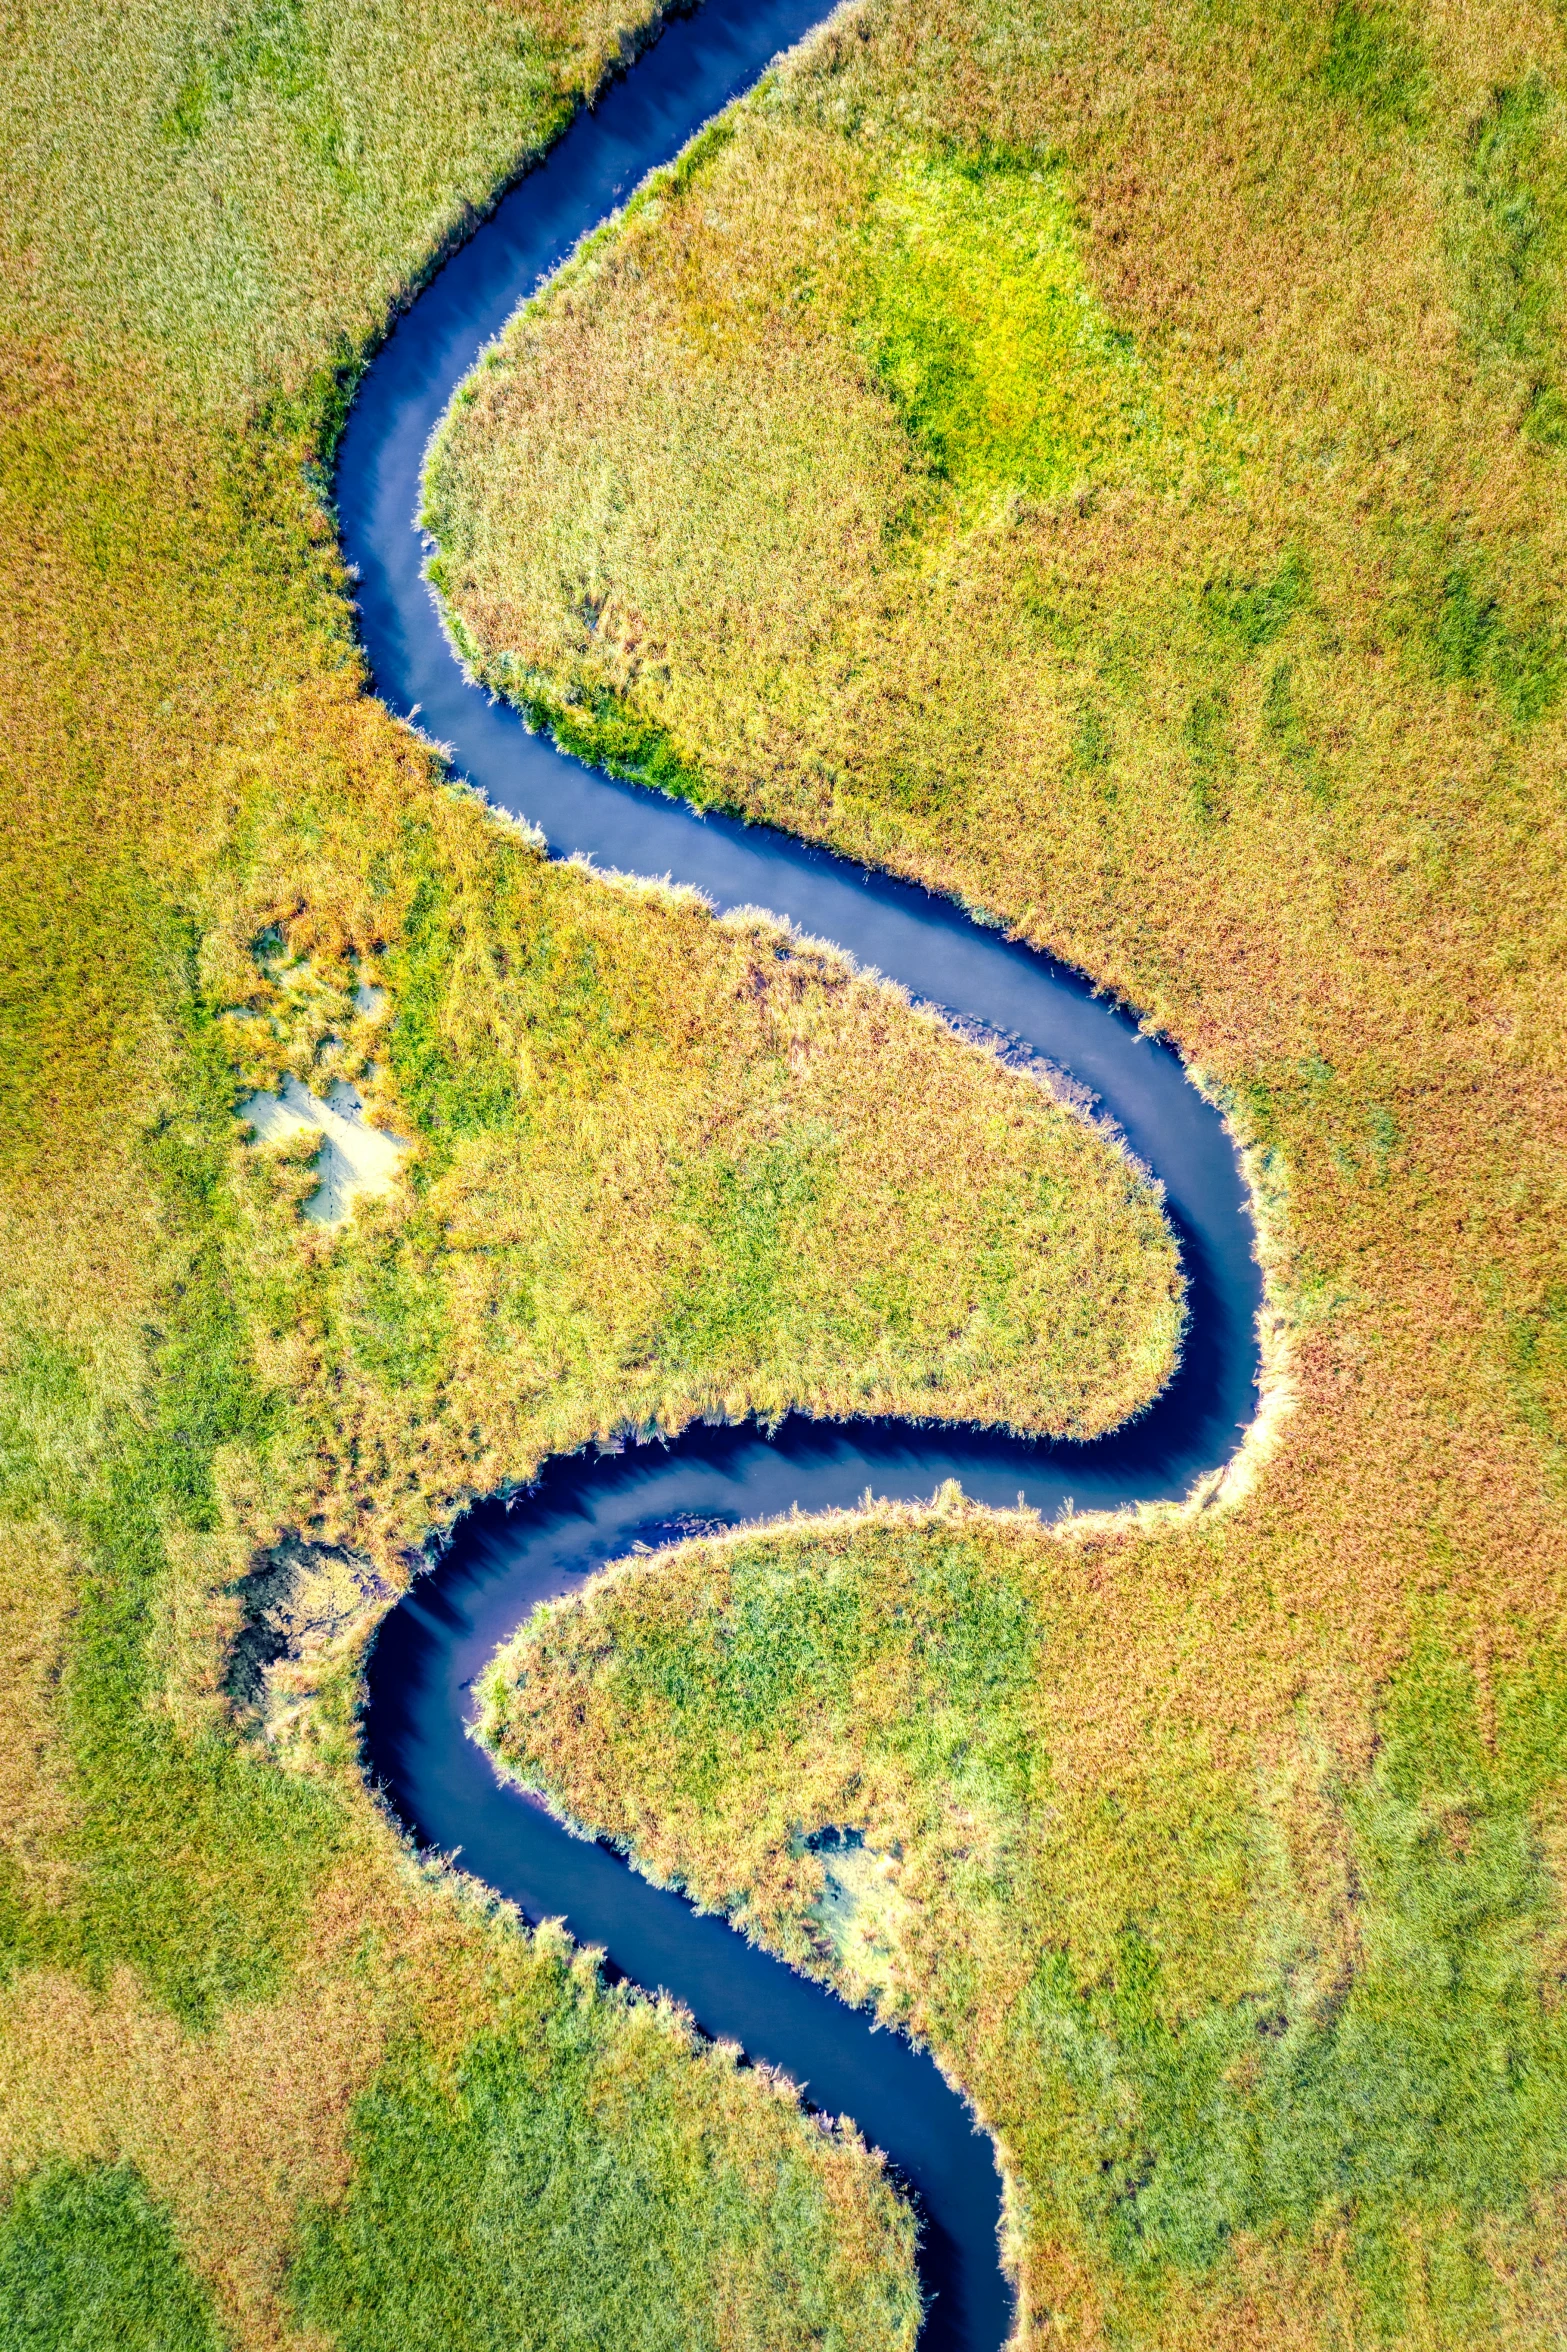 the meander stream in an open field with a path